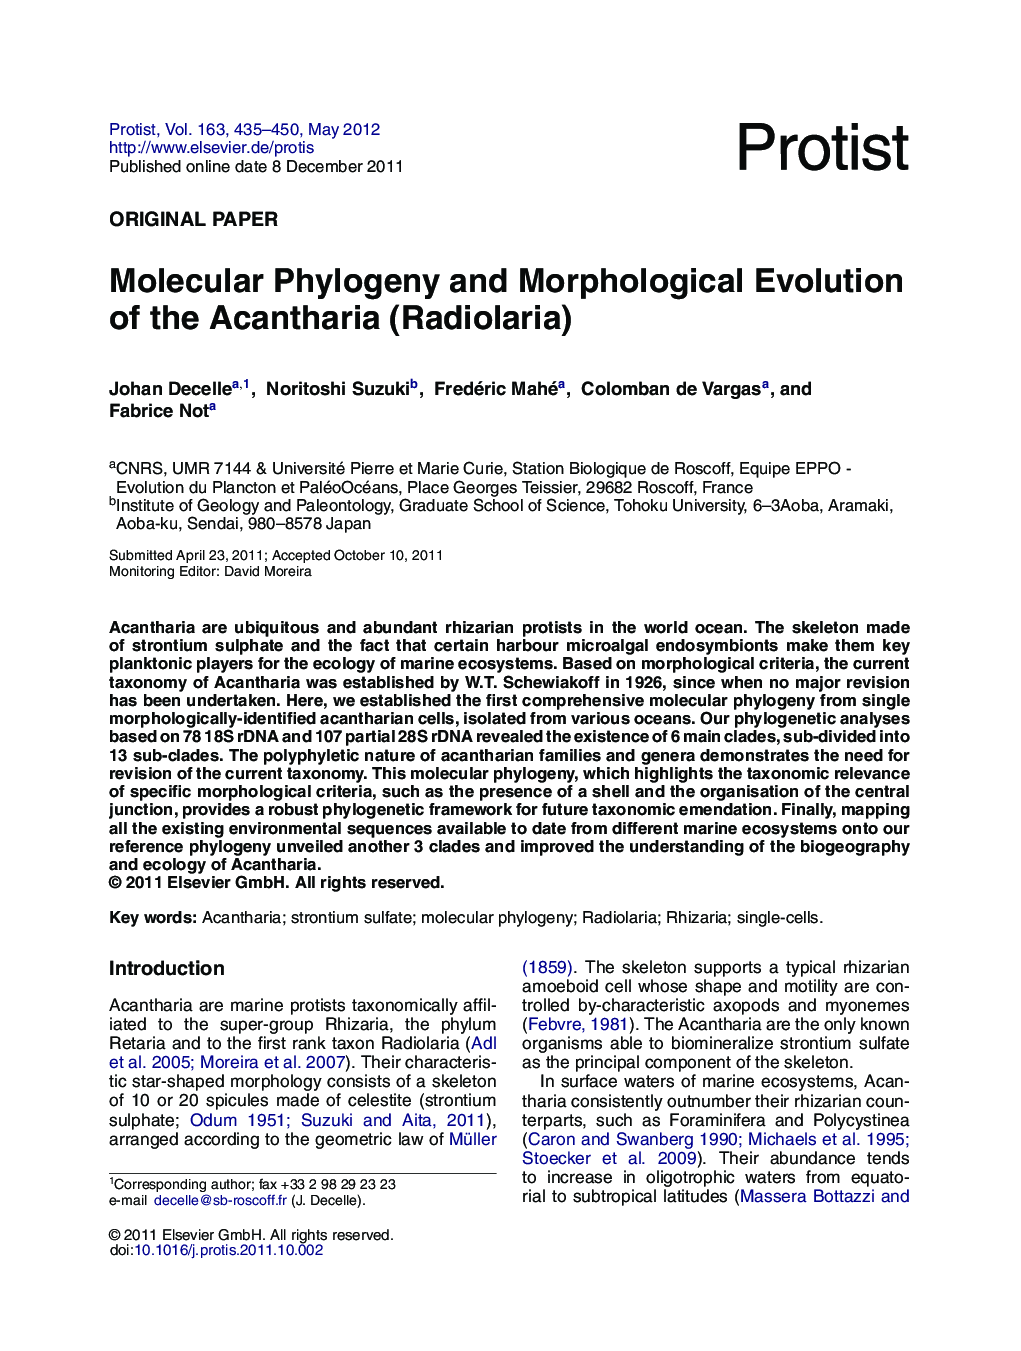 Molecular Phylogeny and Morphological Evolution of the Acantharia (Radiolaria)